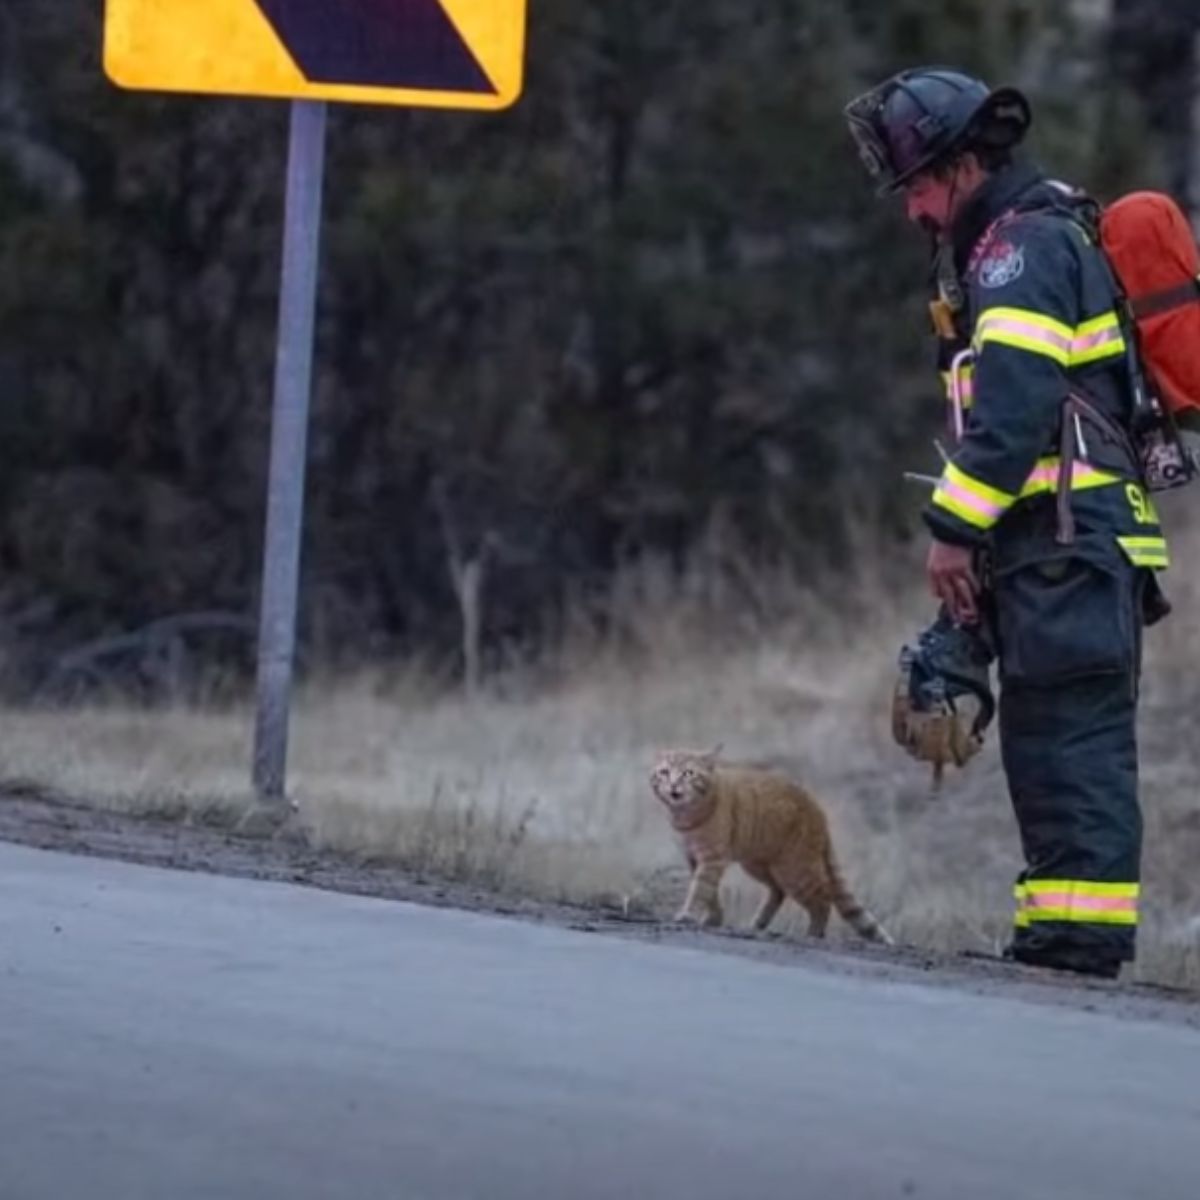 stray cat and firefighter